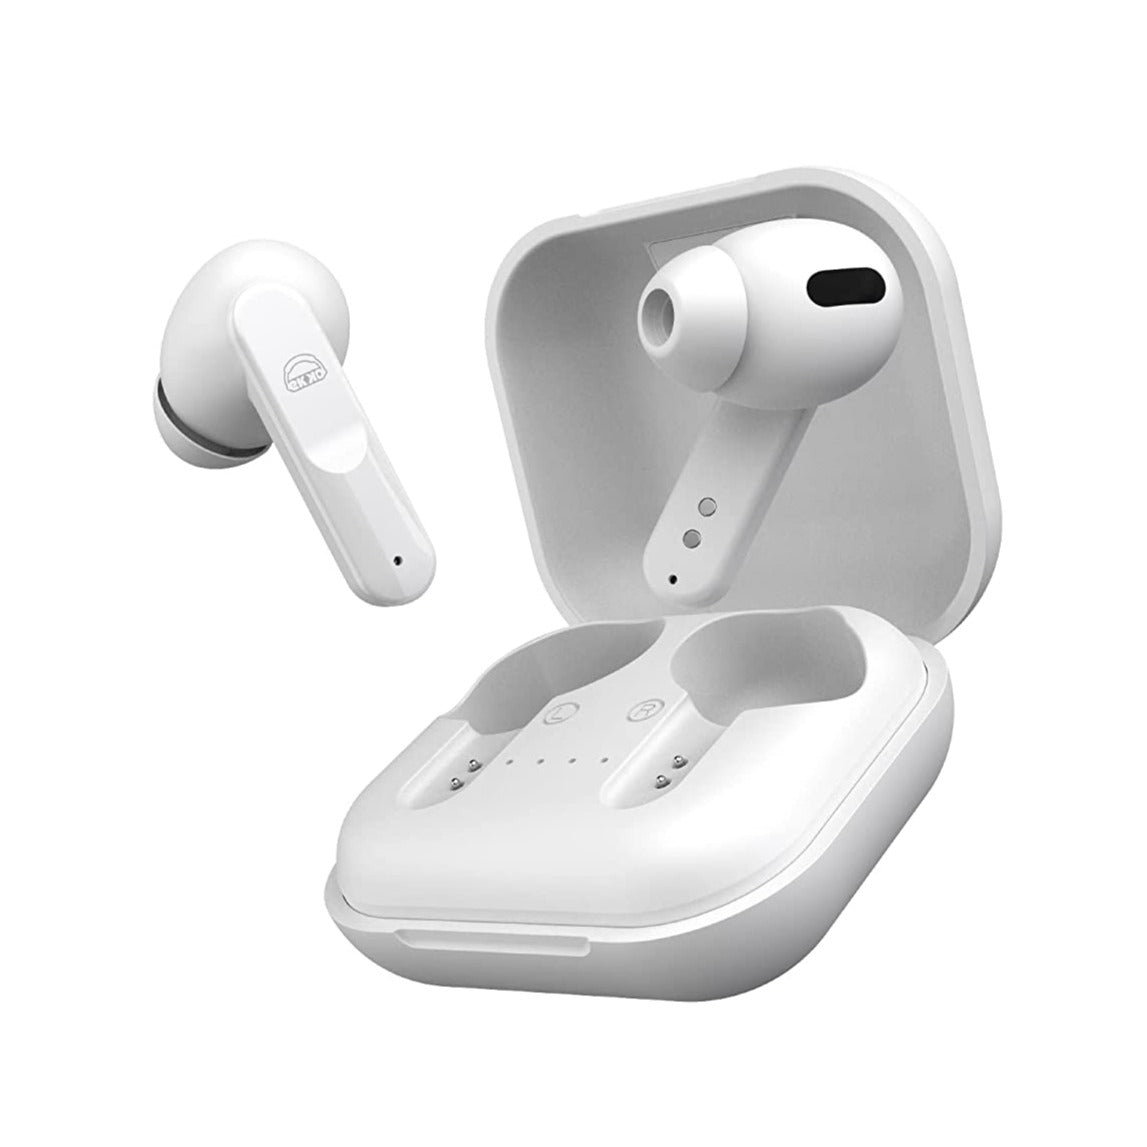 EKKO Earbeats T04 TWS: ENC Call Noise Cancellation, 50H Playtime, 10MM Driver, Twin Connect, Type-C Fast Charging, Siri & Google Assistant